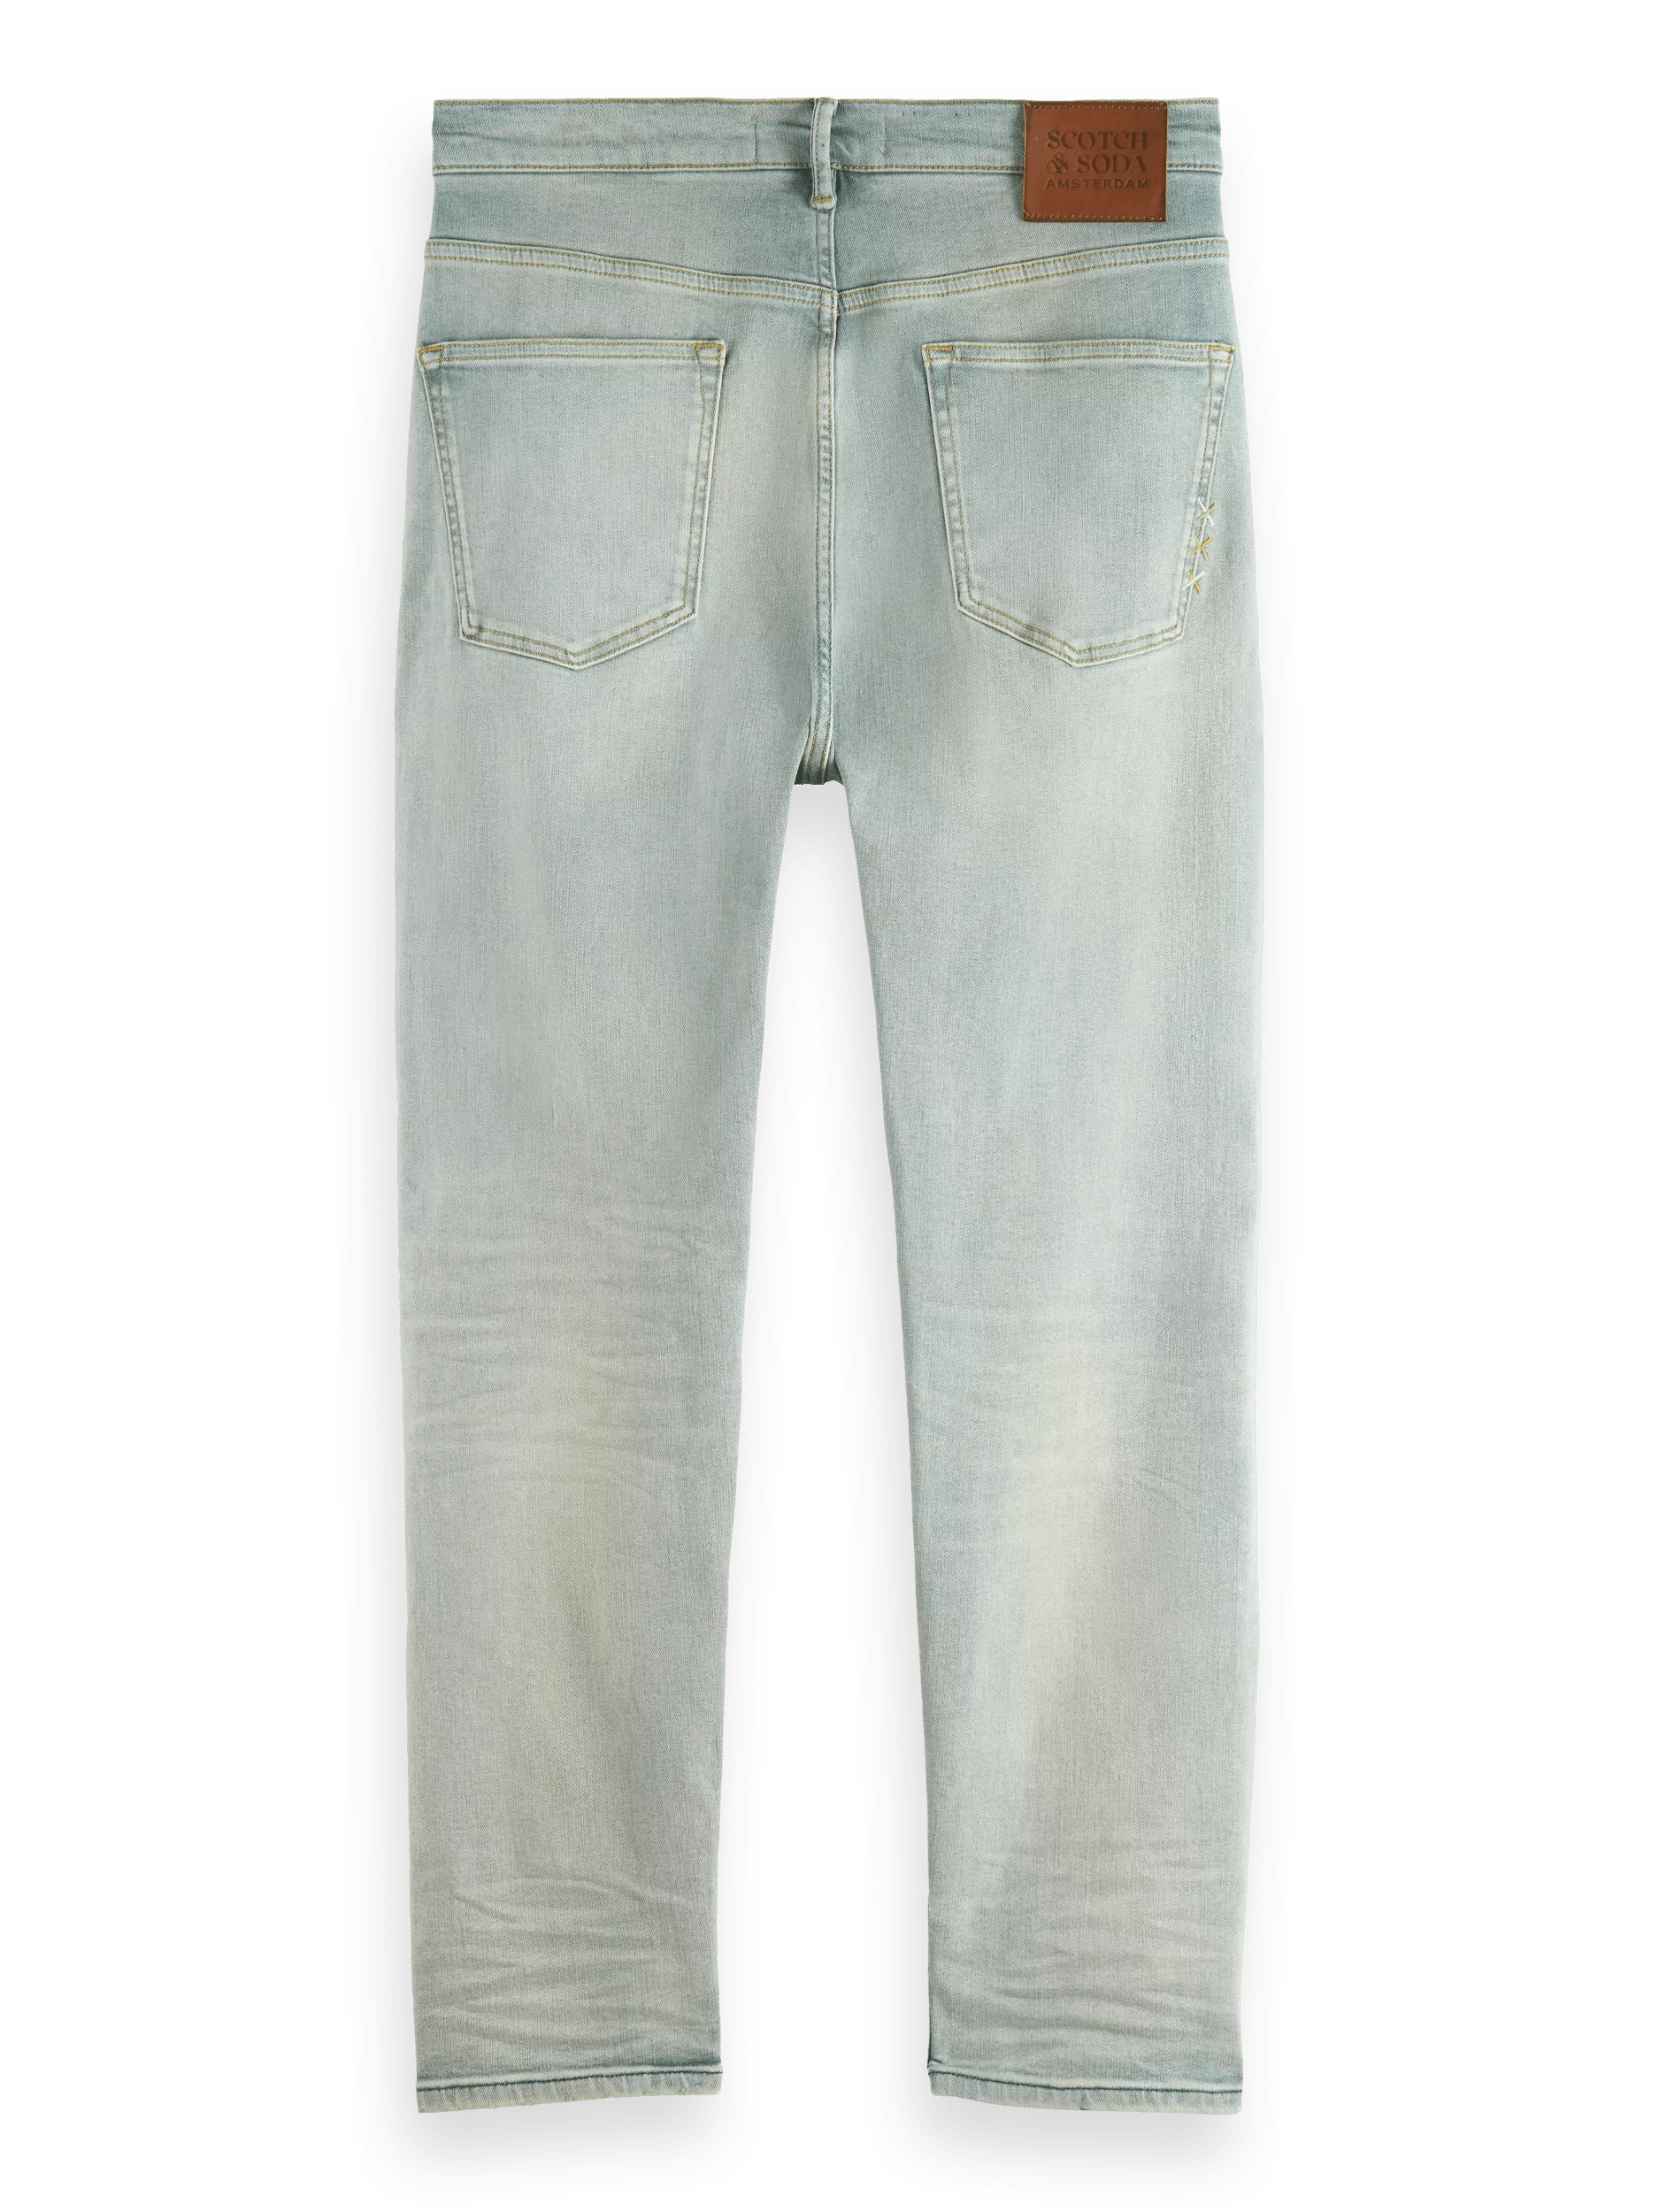 Scotch & Soda The Drop regular tapered-fit jeans BCK